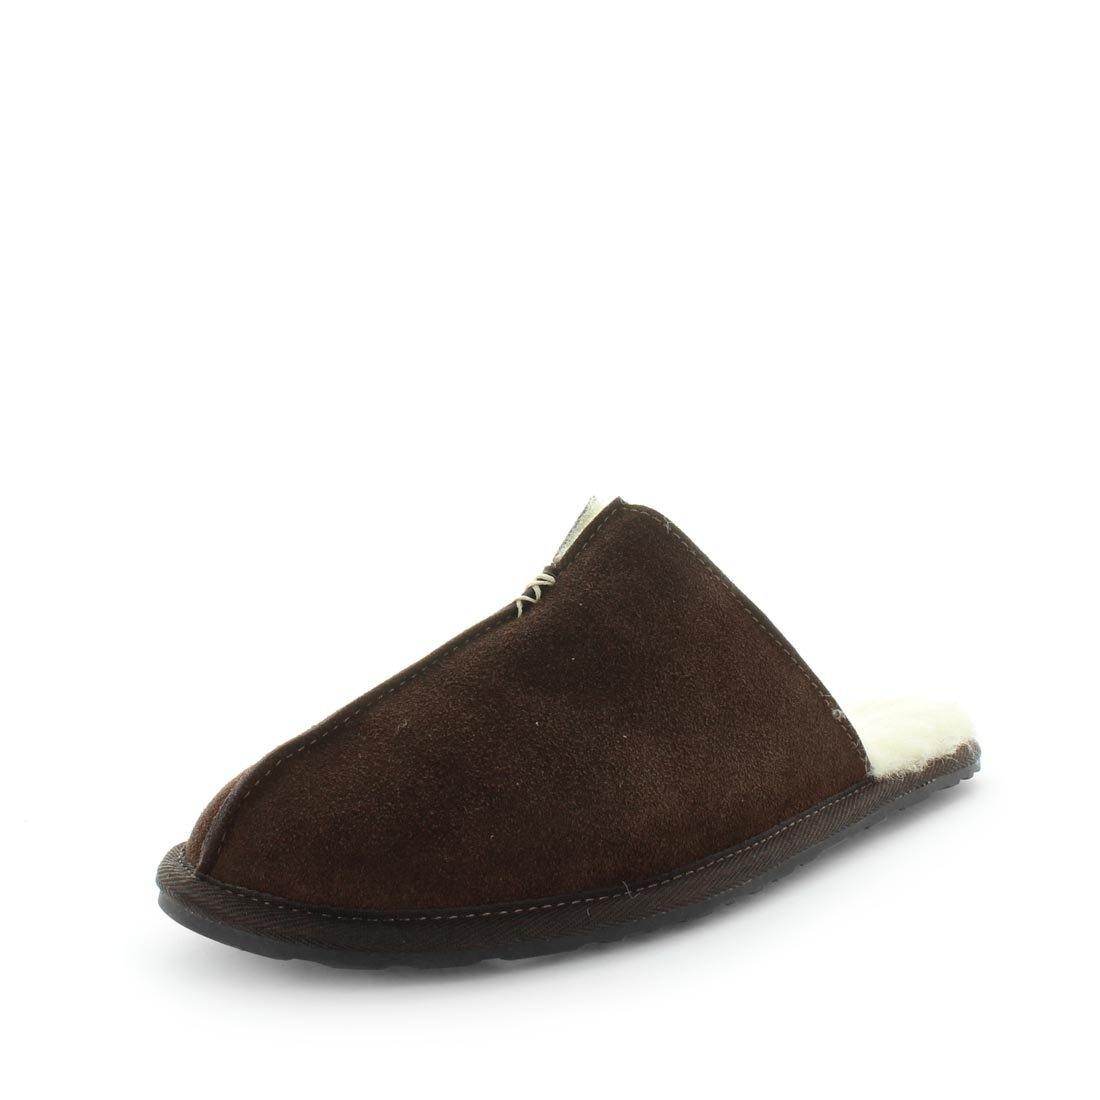 Mens slipper cuffs by just bee uggs, uggs boots - just bee slippers - mens slippers, moccasin slippers, wool slippers, 100% wool slippers (6536948351055)